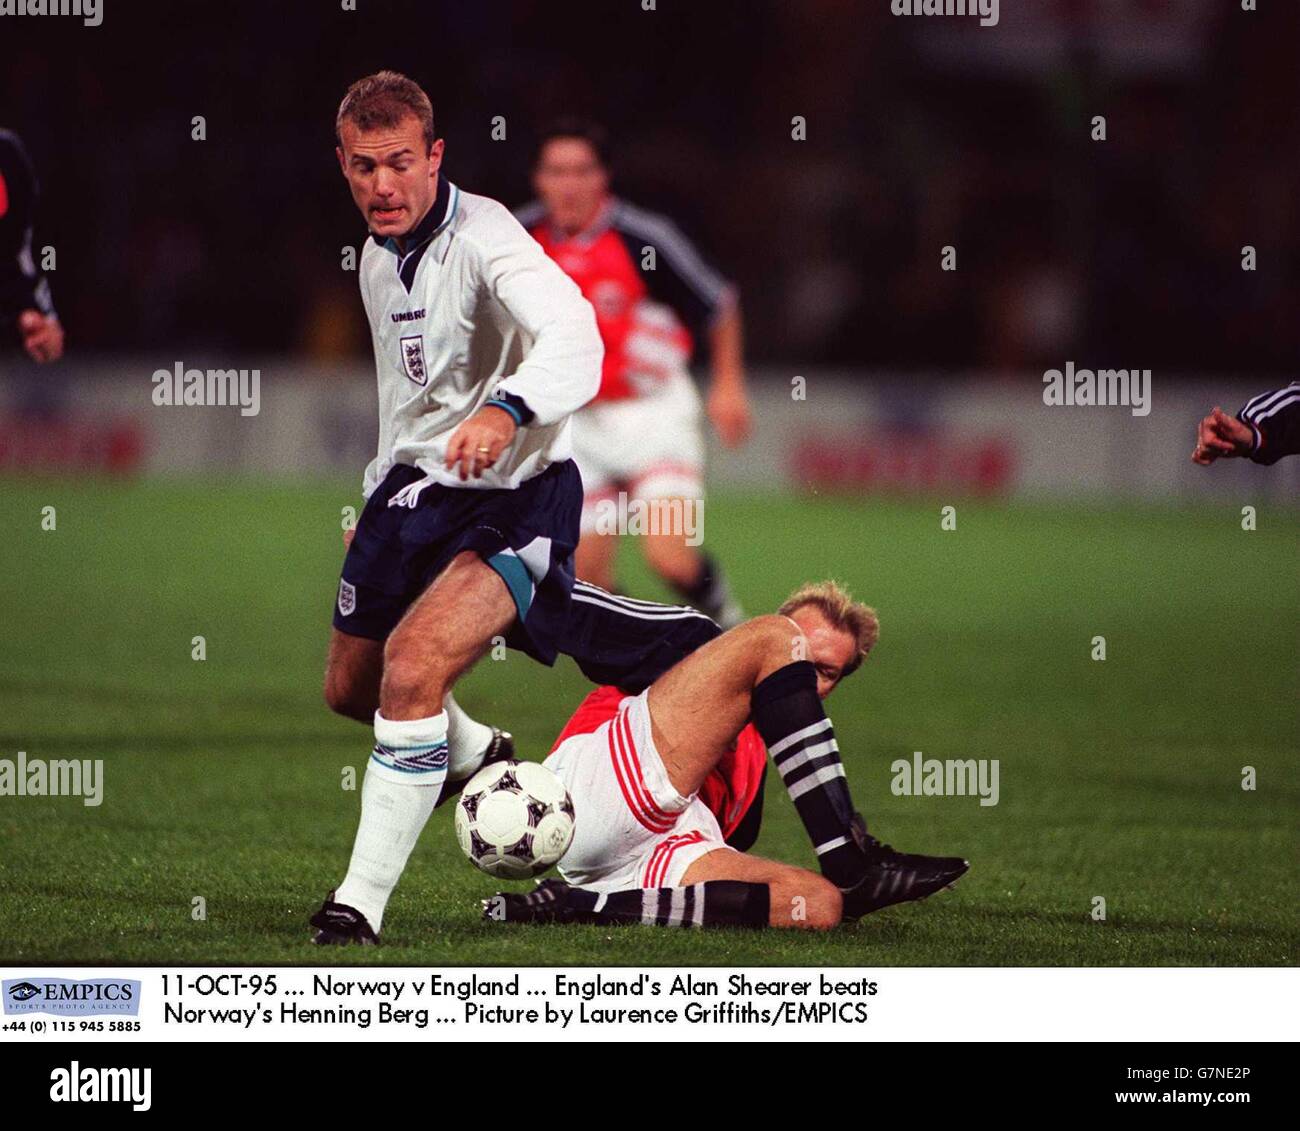 11-OCT-95. Norway v England. England's Alan Shearer beats Norway's Henning Berg. Picture by Laurence Griffiths/EMPICS Stock Photo